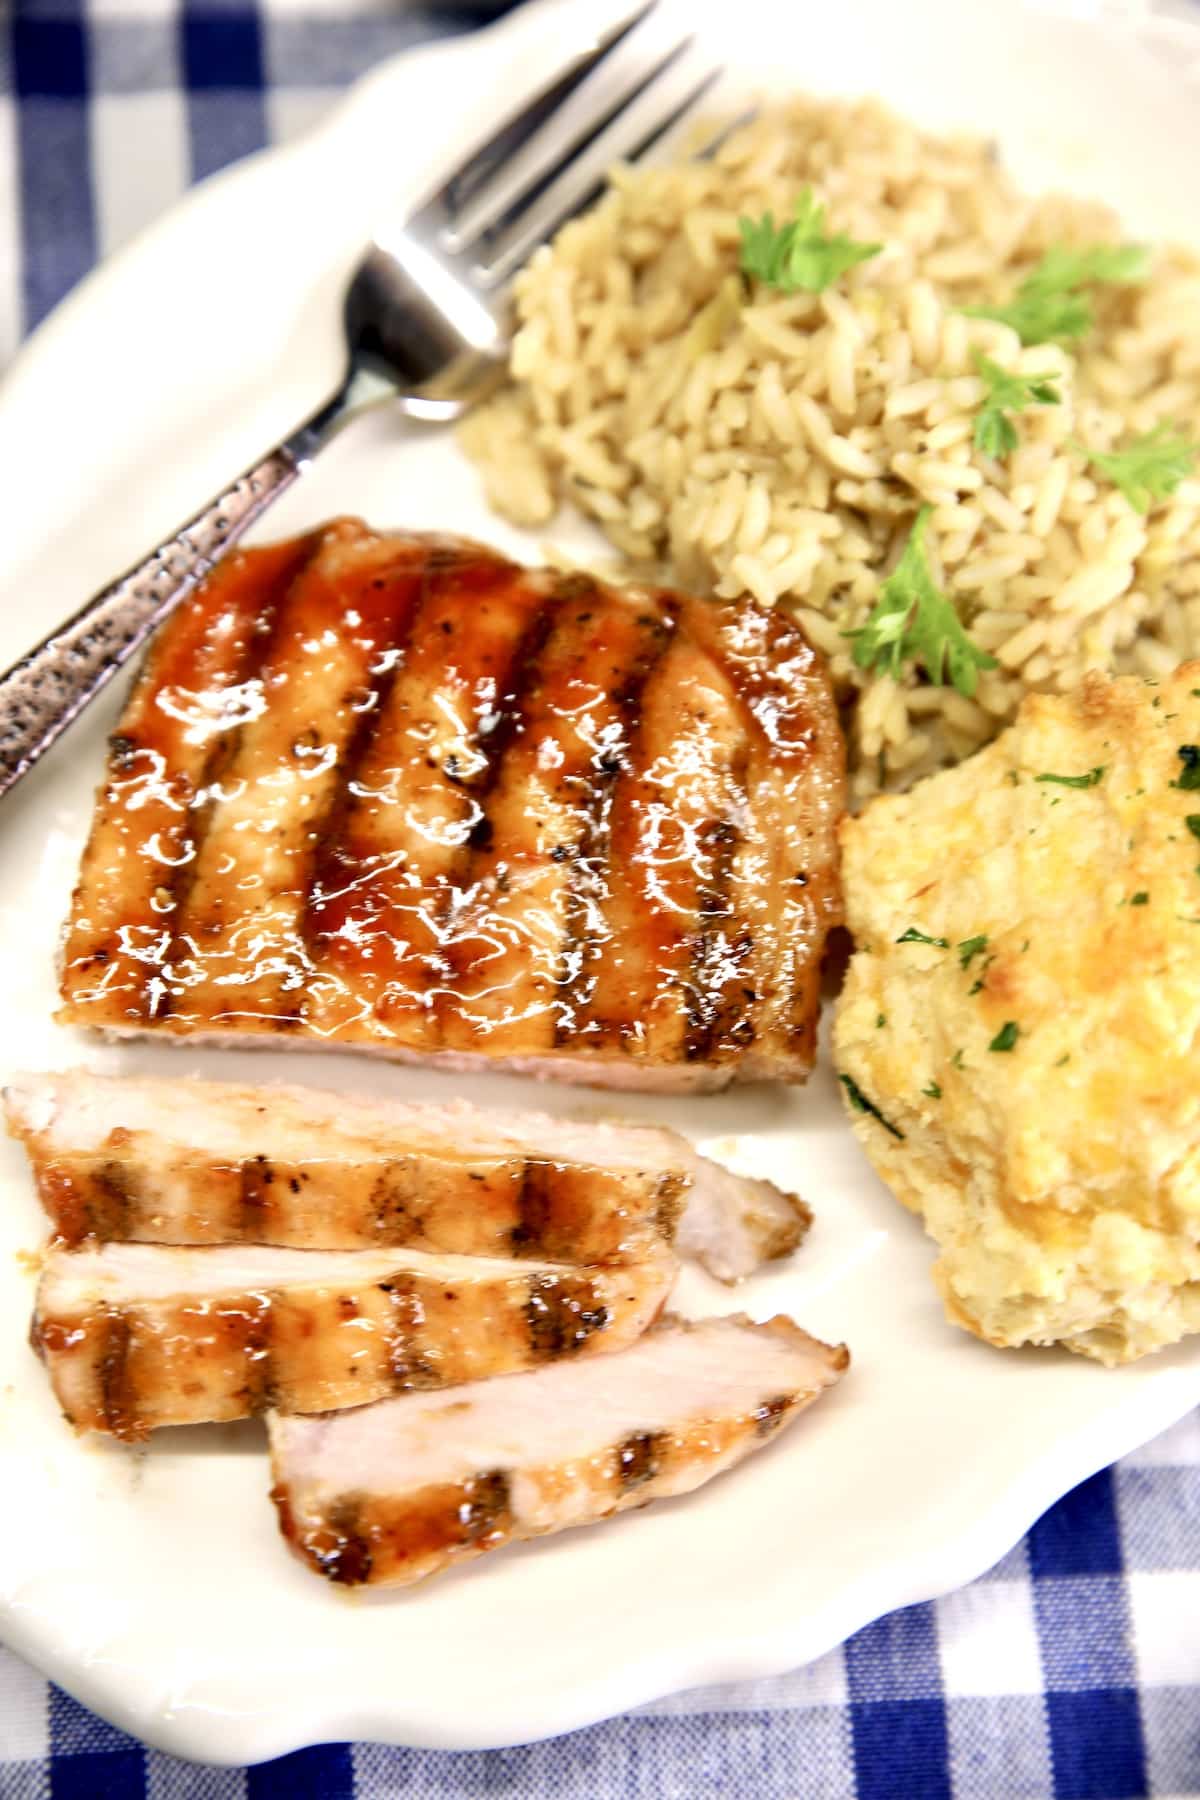 Grilled pork chop on a plate with rice and a biscuit.